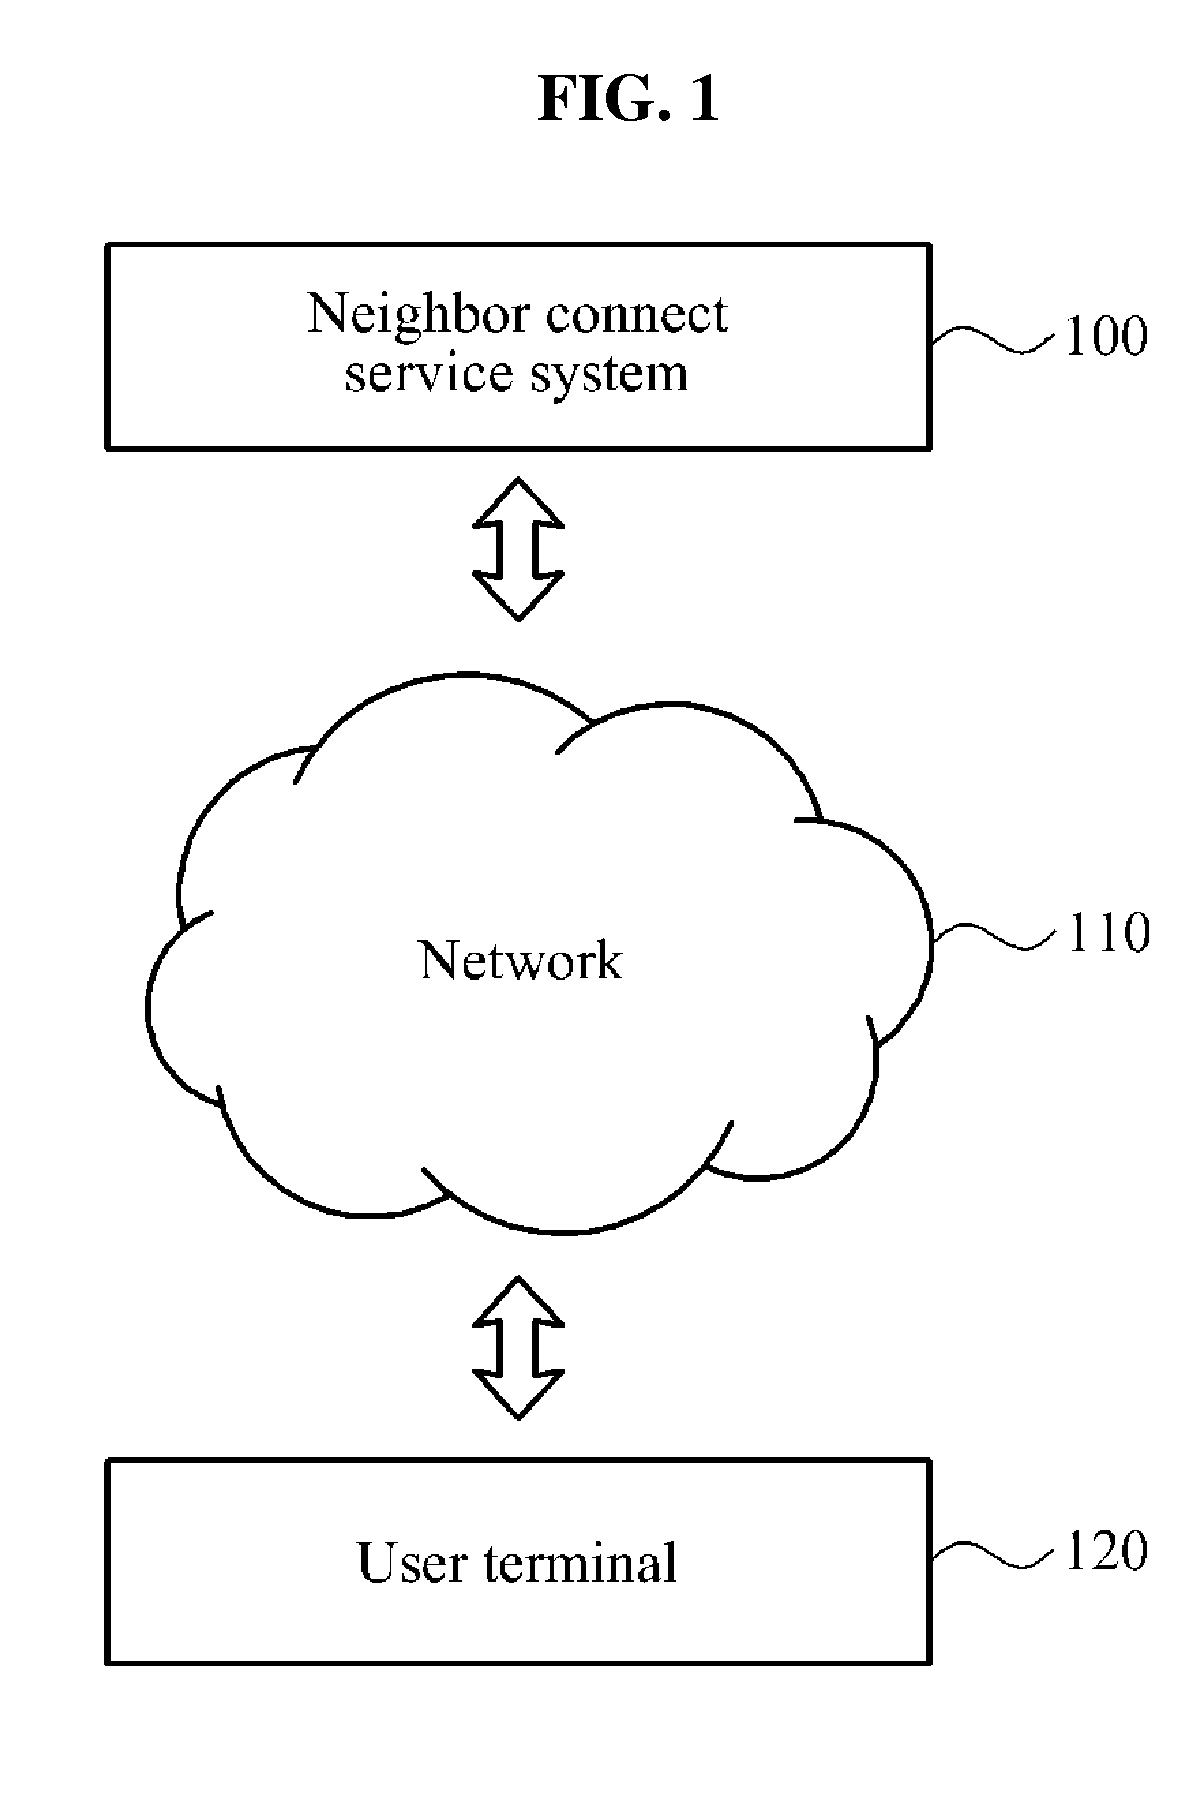 System and method for providing neighbor connect service